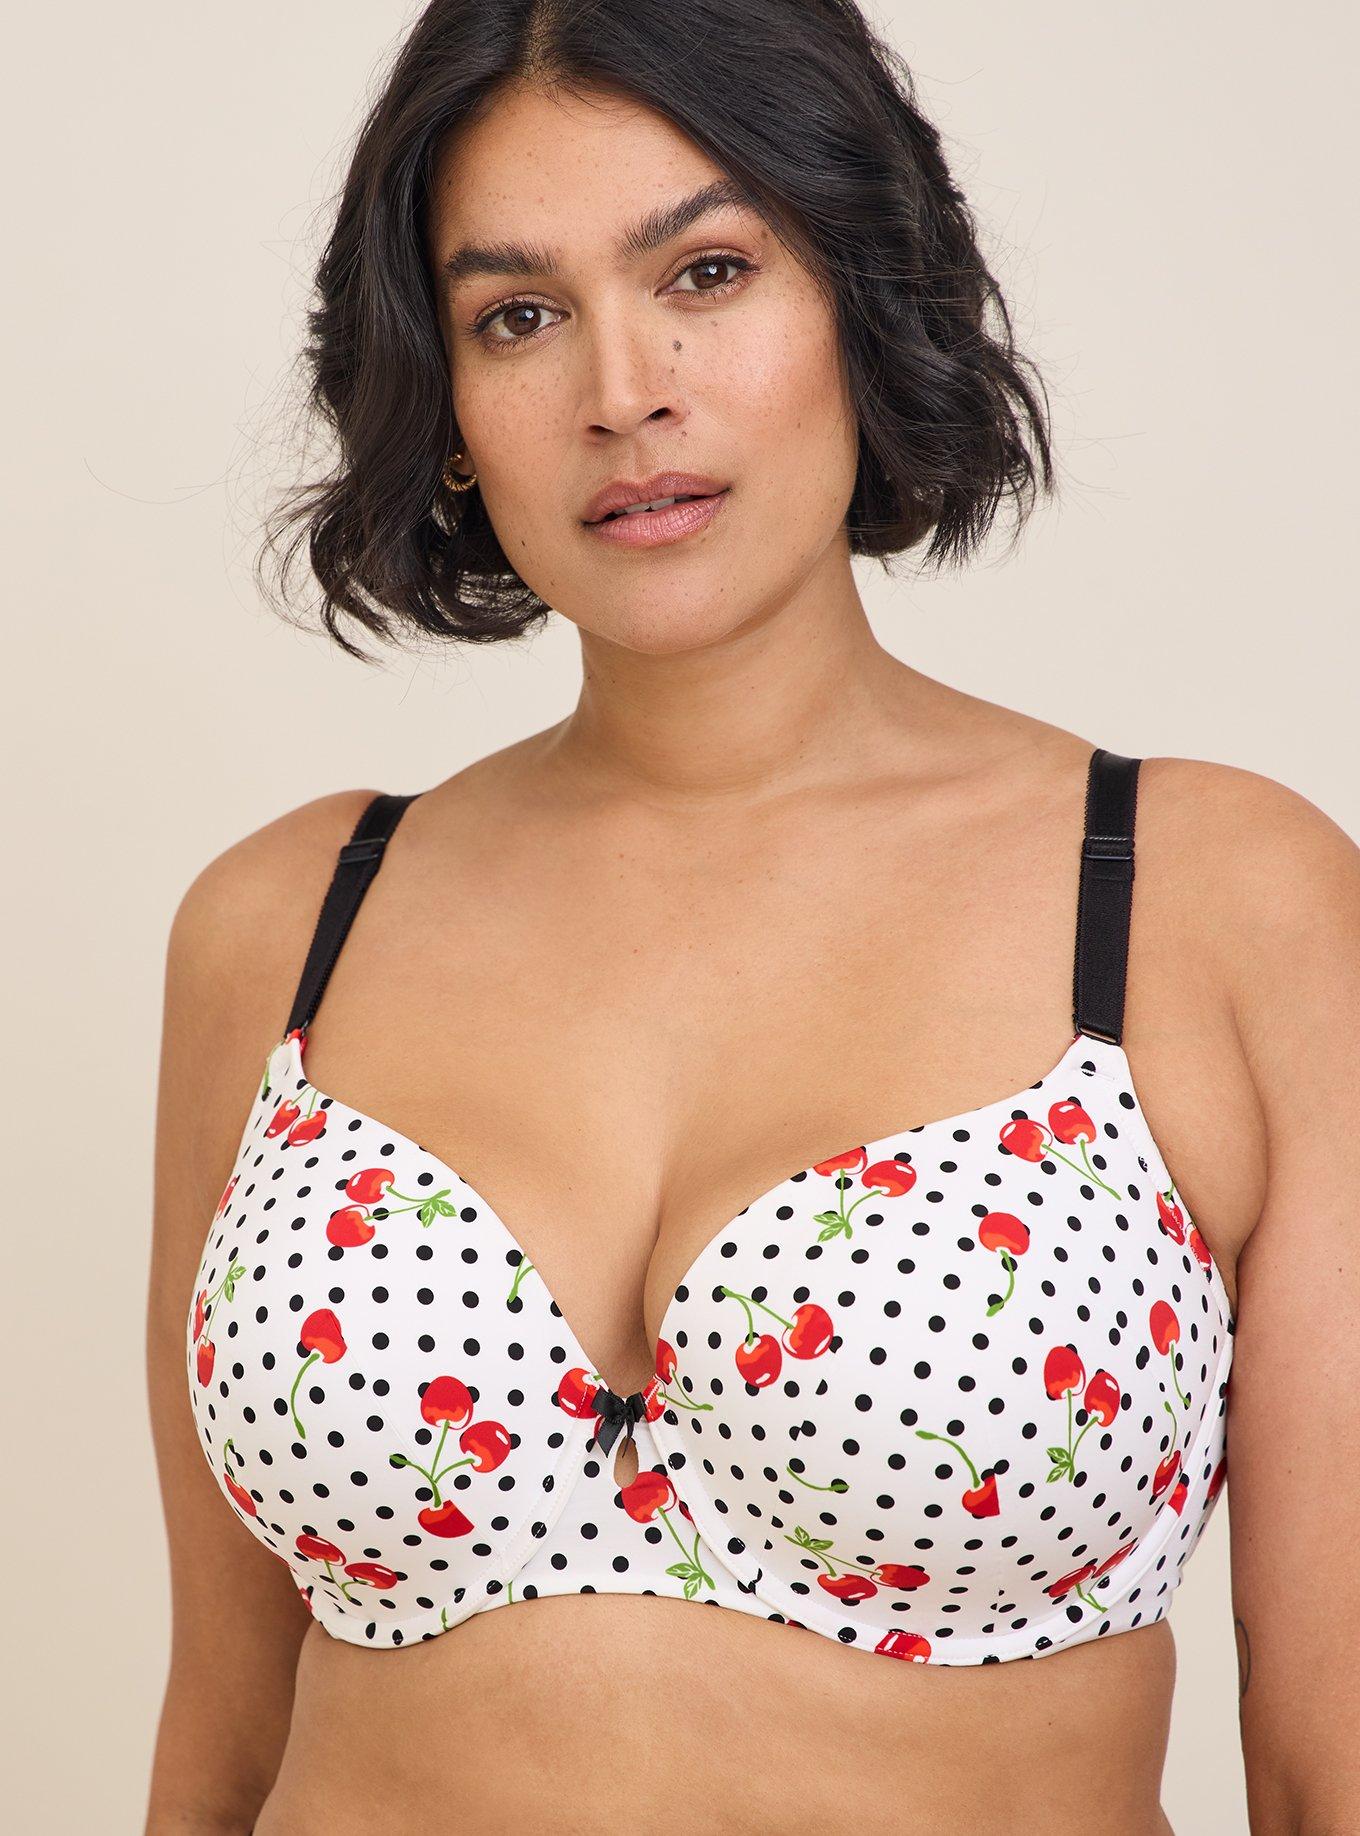 Having a size 40B feels like “how dare you have small breasts and